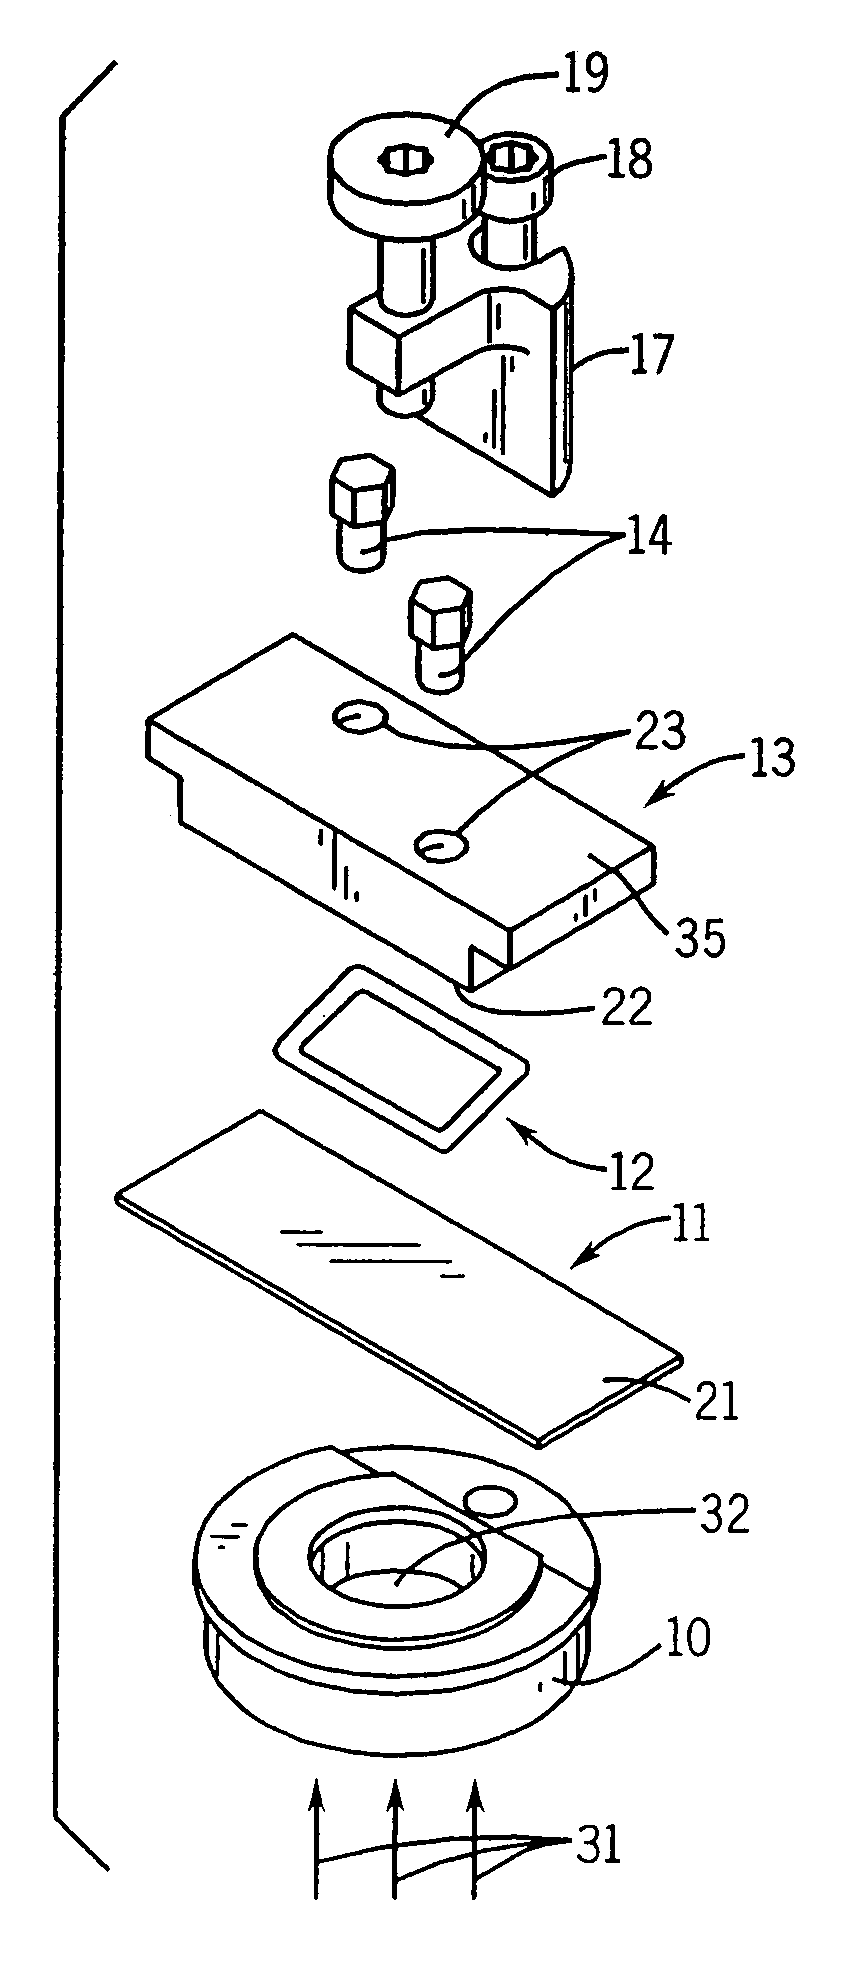 Microarray synthesis instrument and method